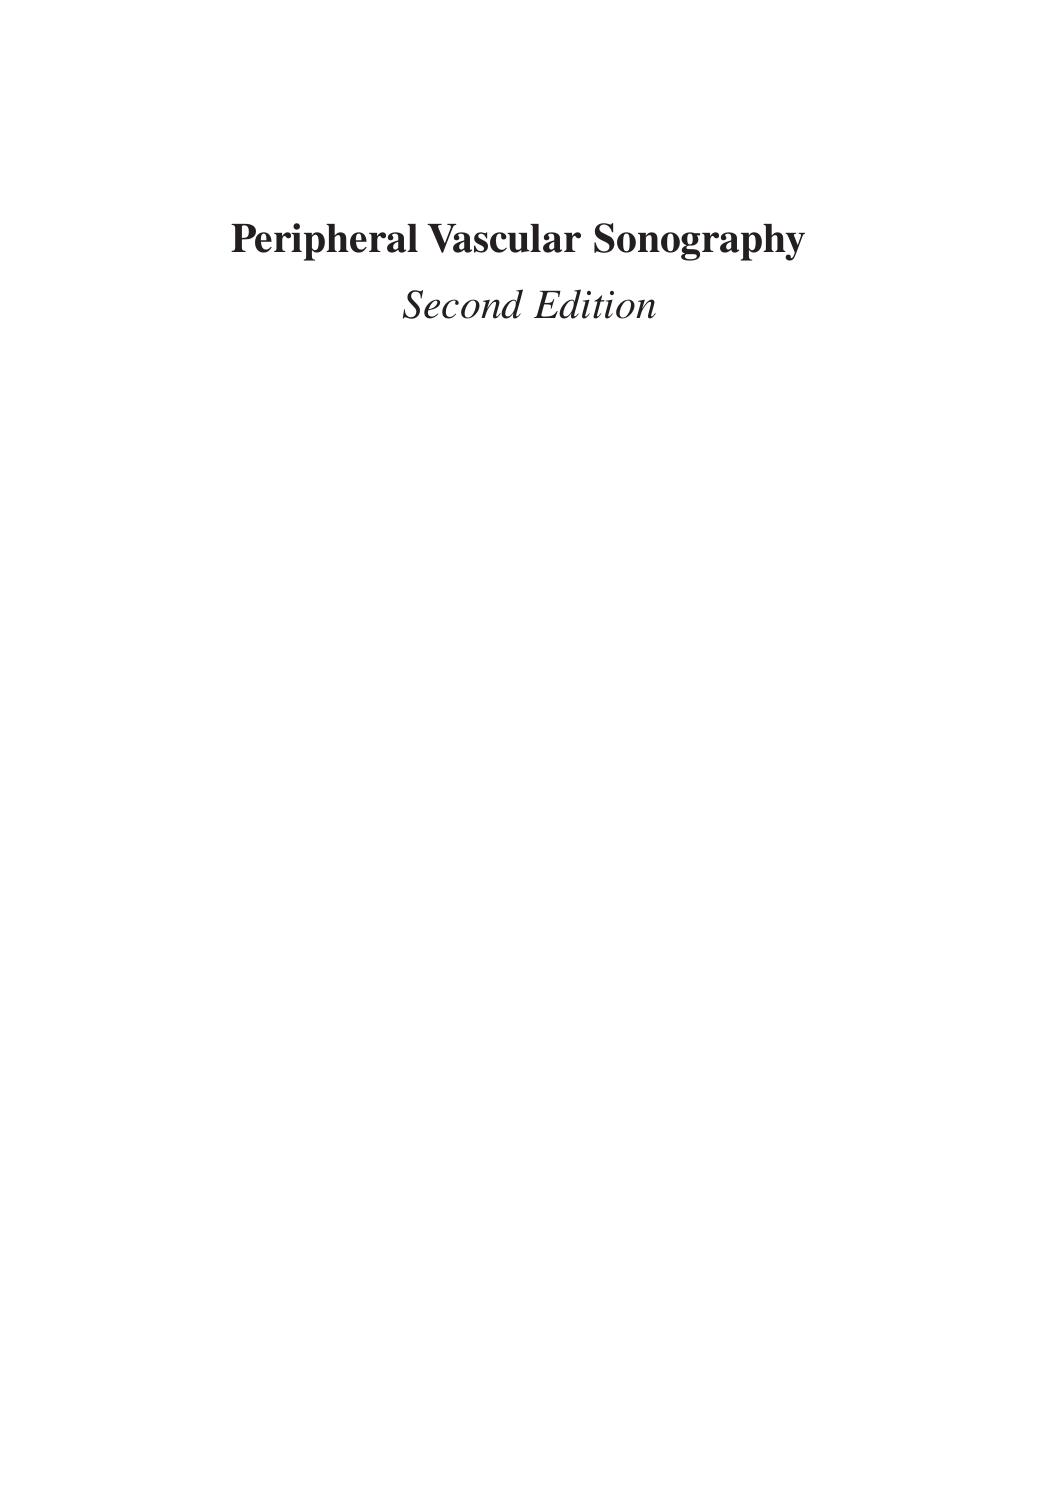 Peripheral Vascular Sonography : A Practical Guide by Joseph F. Polak